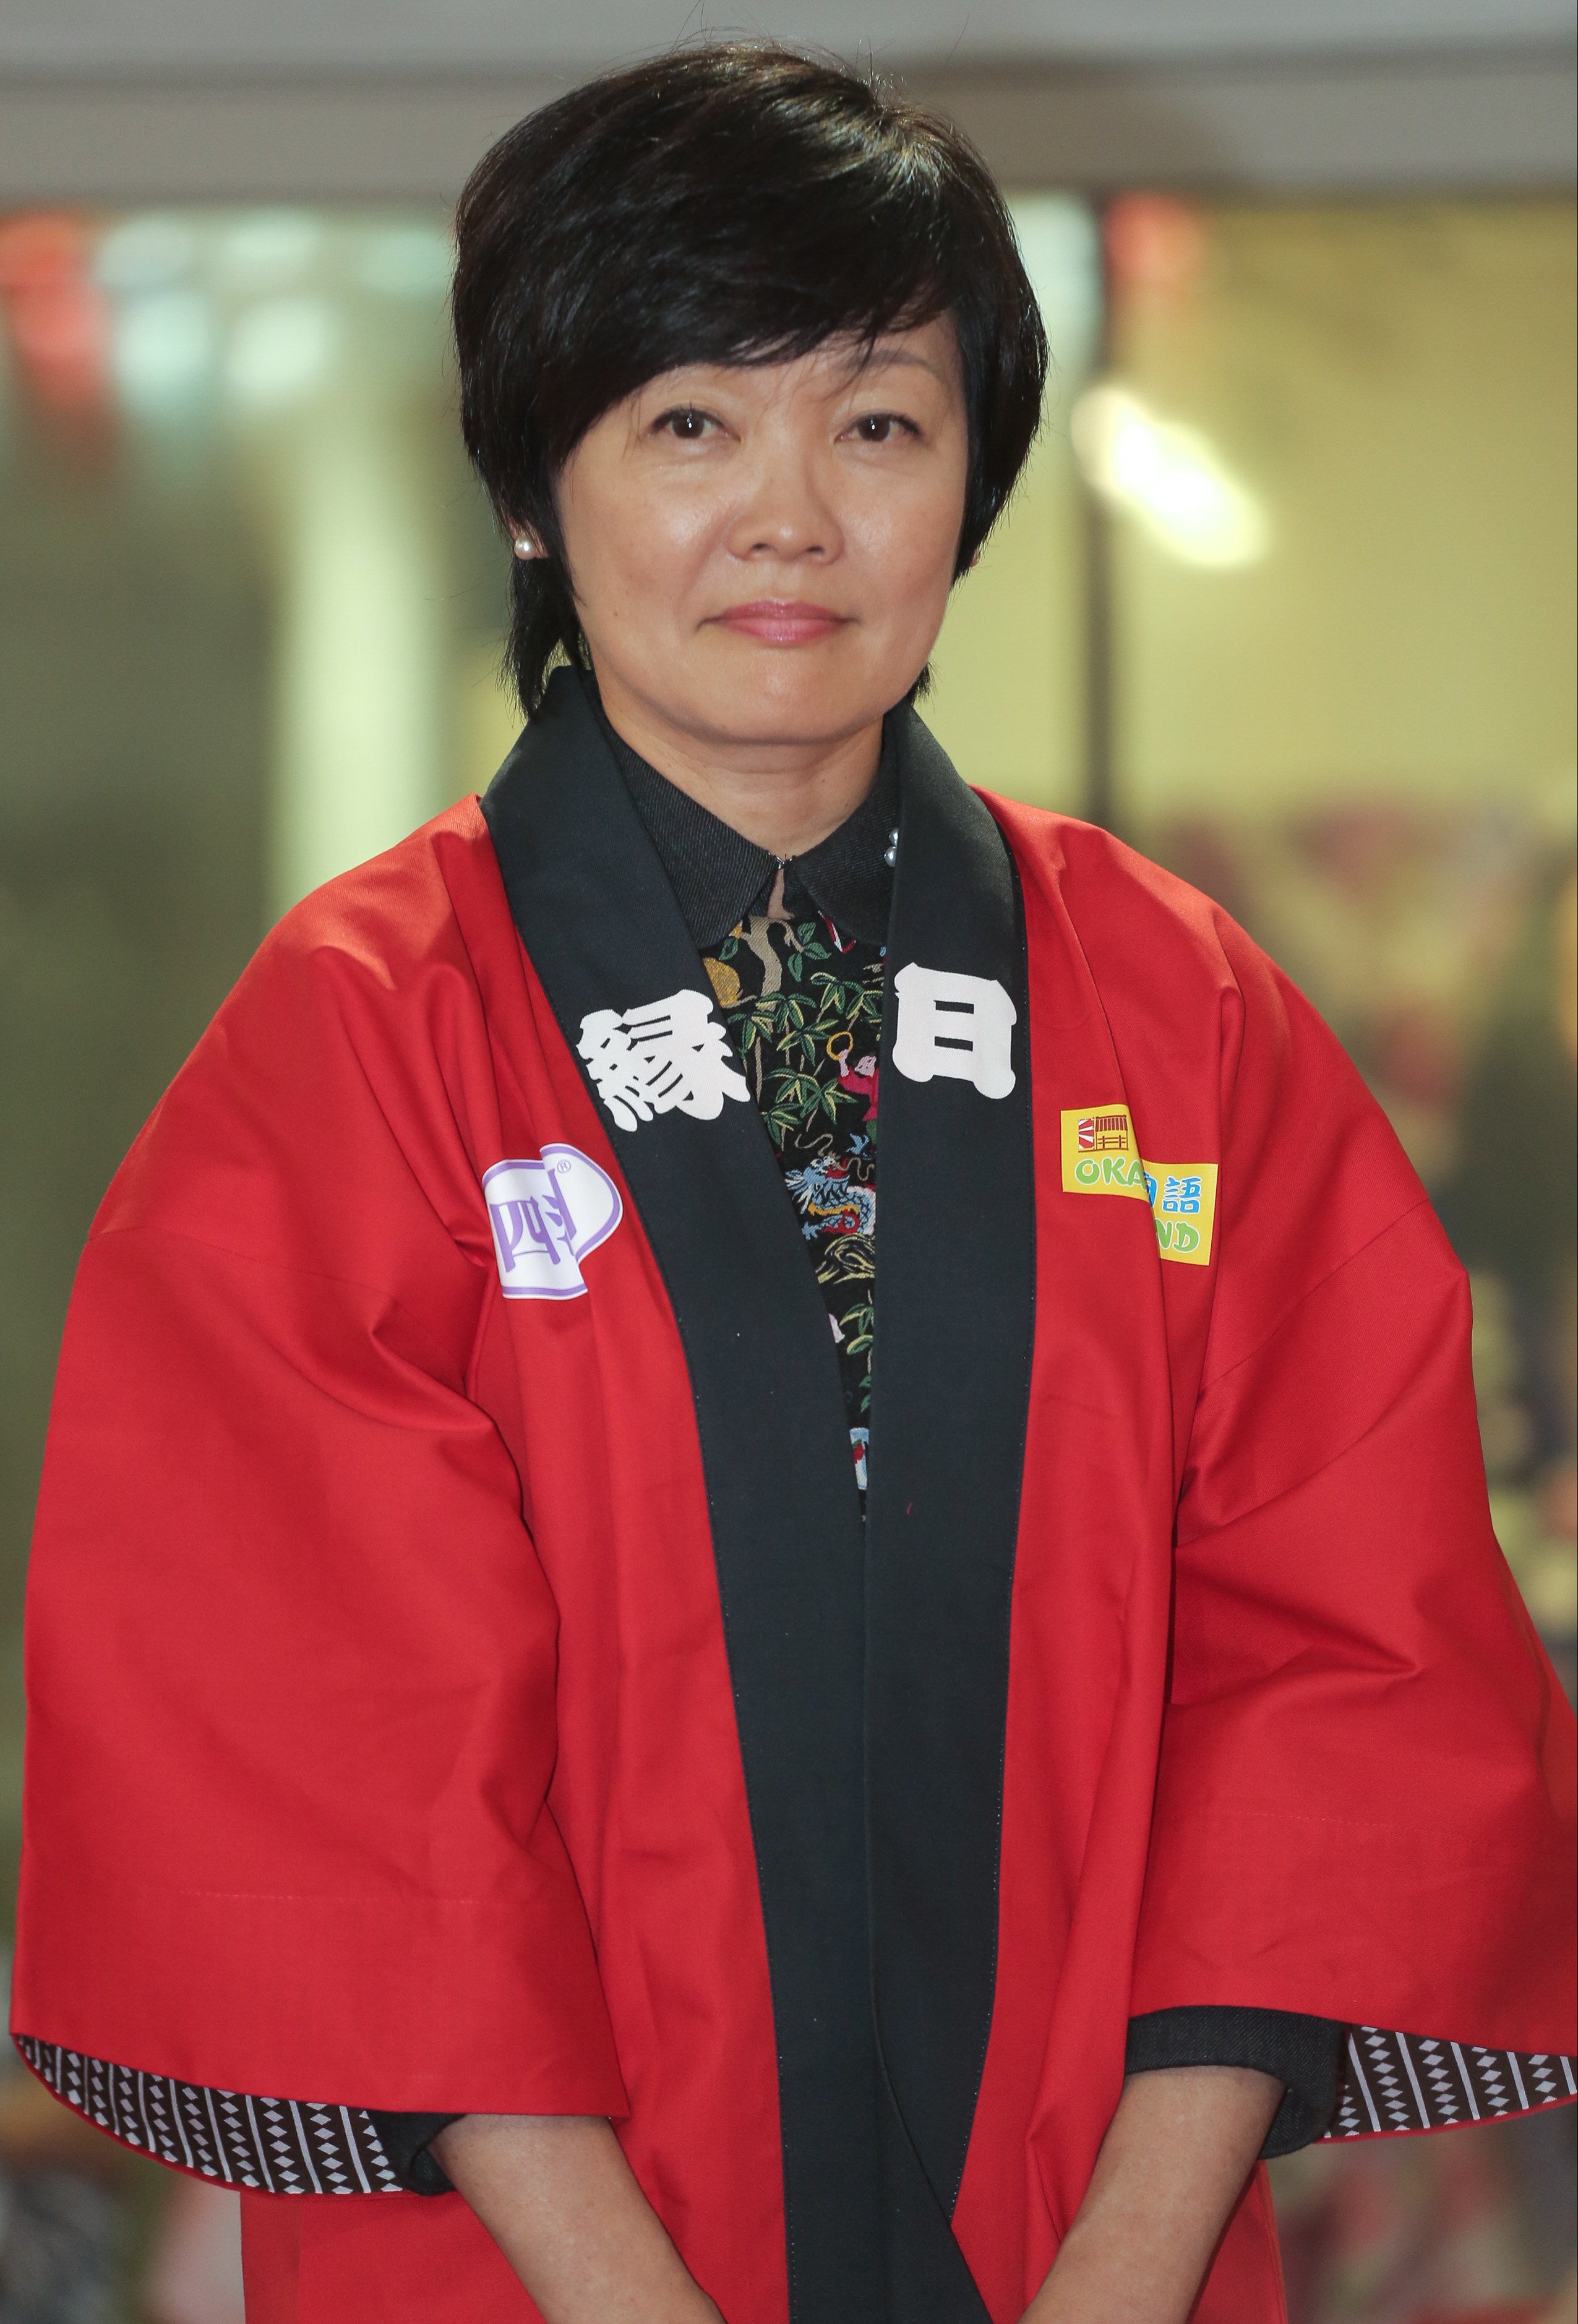 Akie Abe, widow of Japan’s former prime minister Shinzo Abe, is known for doing things differently. Photo: Paul Yeung